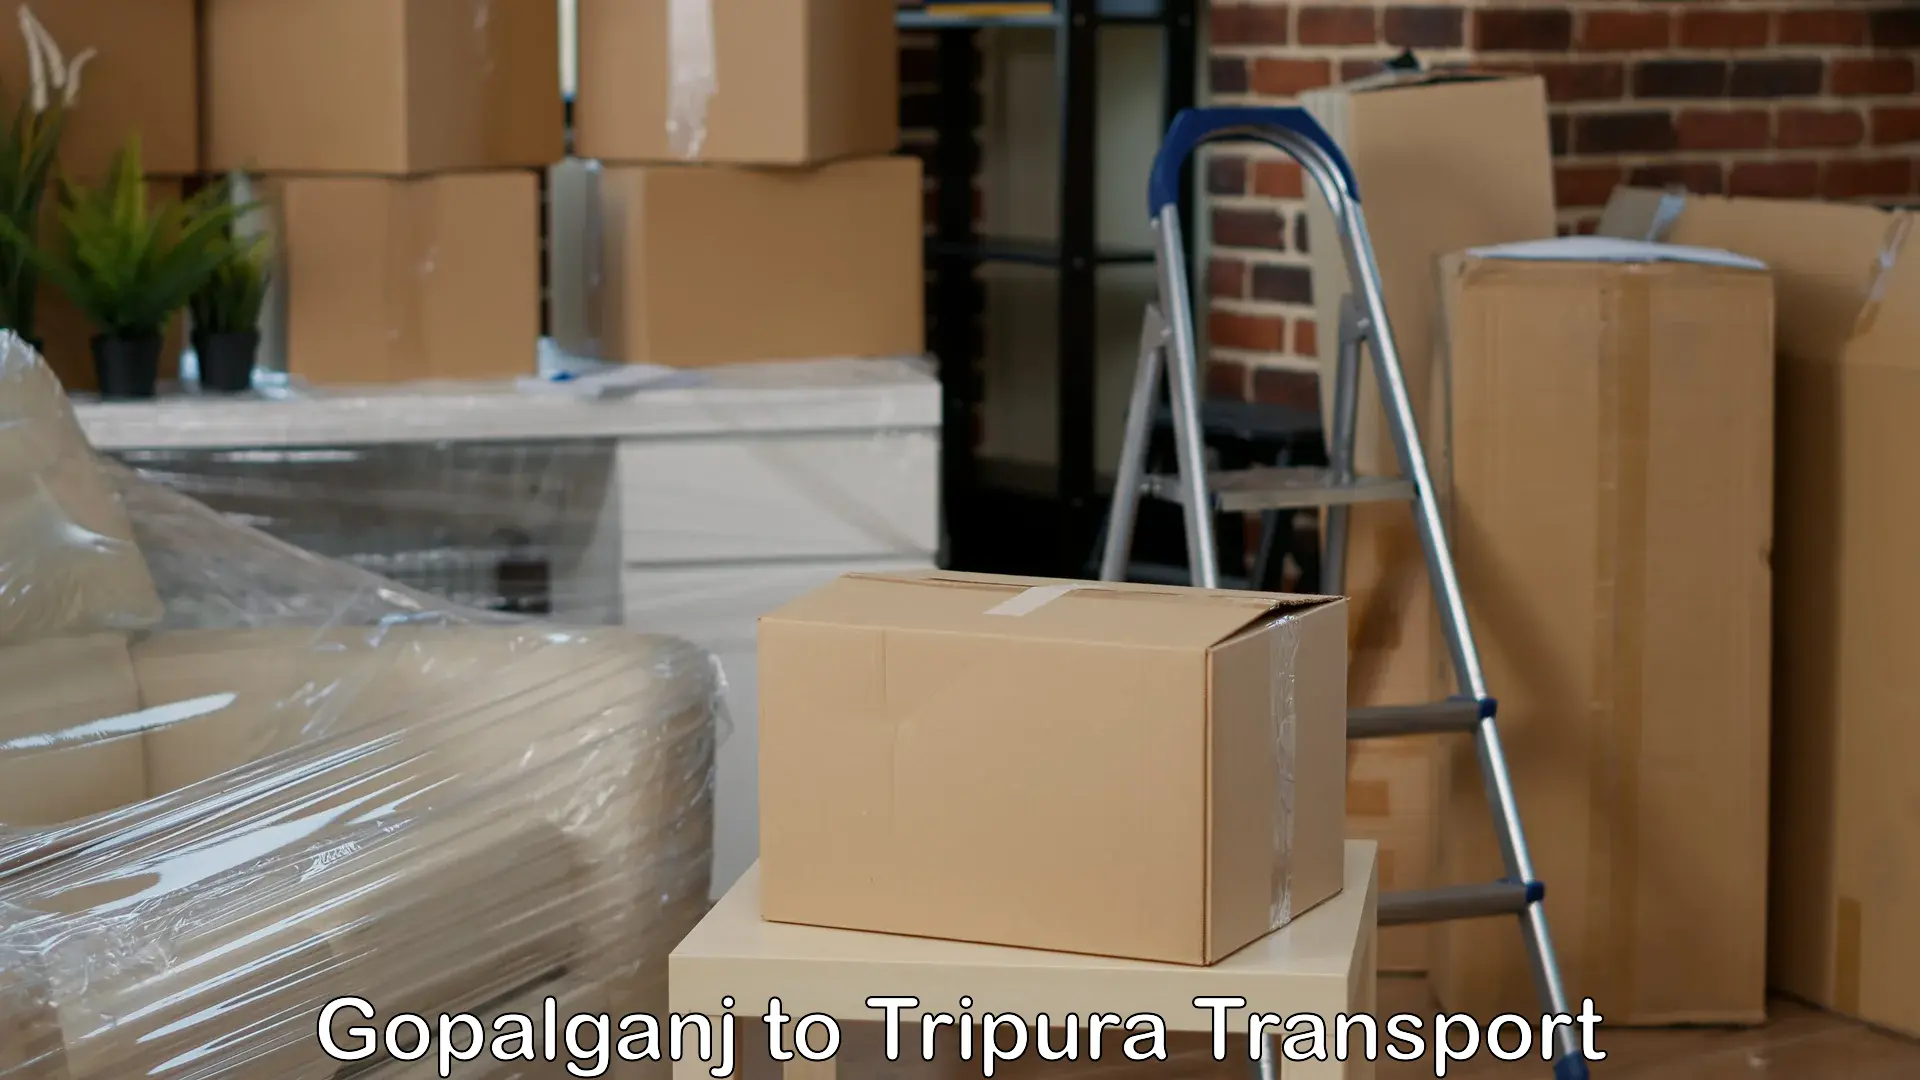 Transport bike from one state to another Gopalganj to Udaipur Tripura